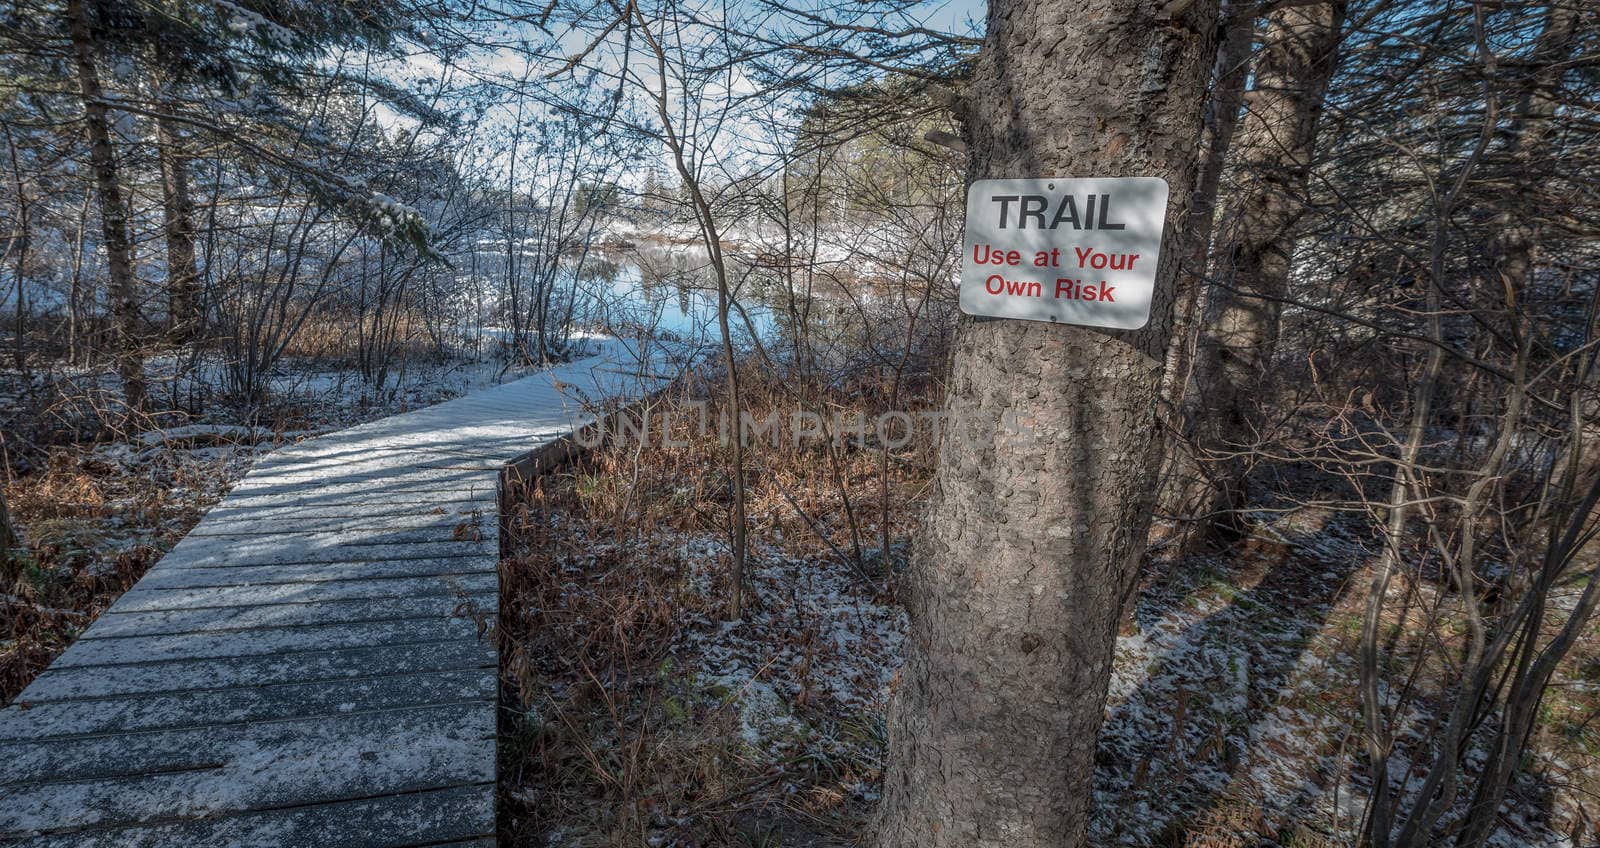 A walking trail warning sign on a tree advises of risk.  Foot path in winter woods. Fresh fallen snow, winter day.